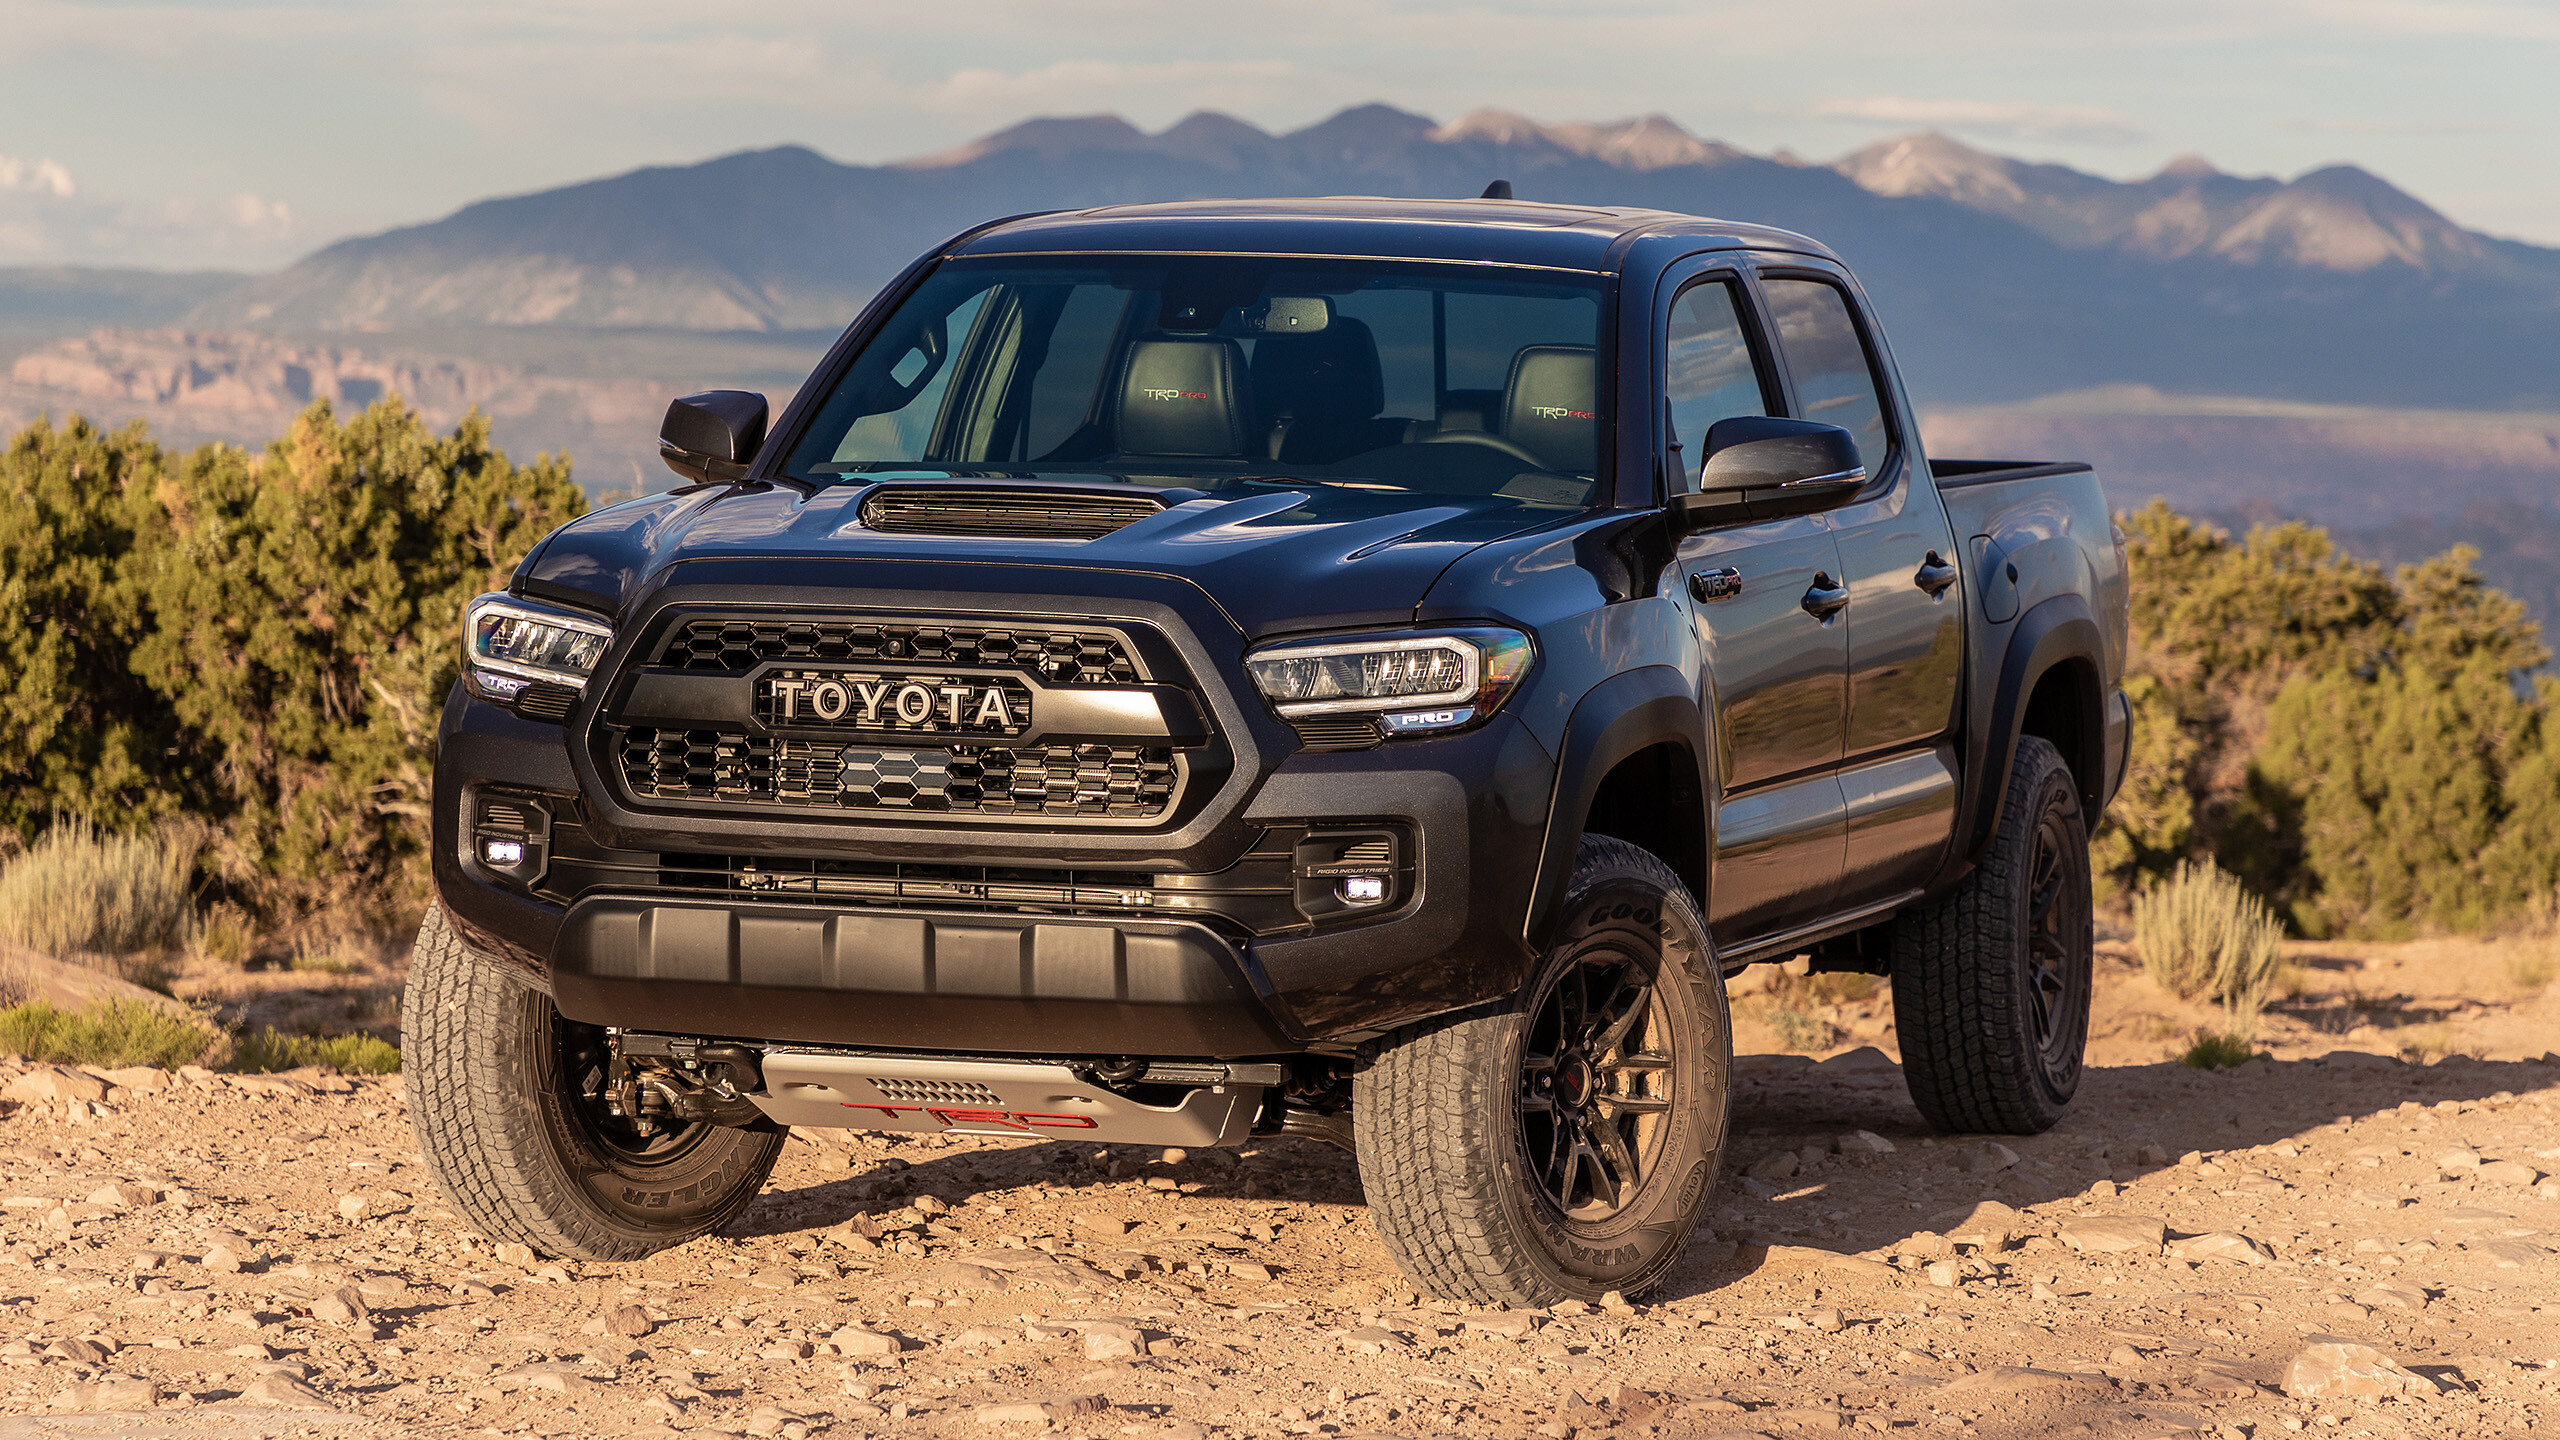 Toyota Tacoma: An S-Runner trim package was unveiled in October 2000. 2560x1440 HD Background.